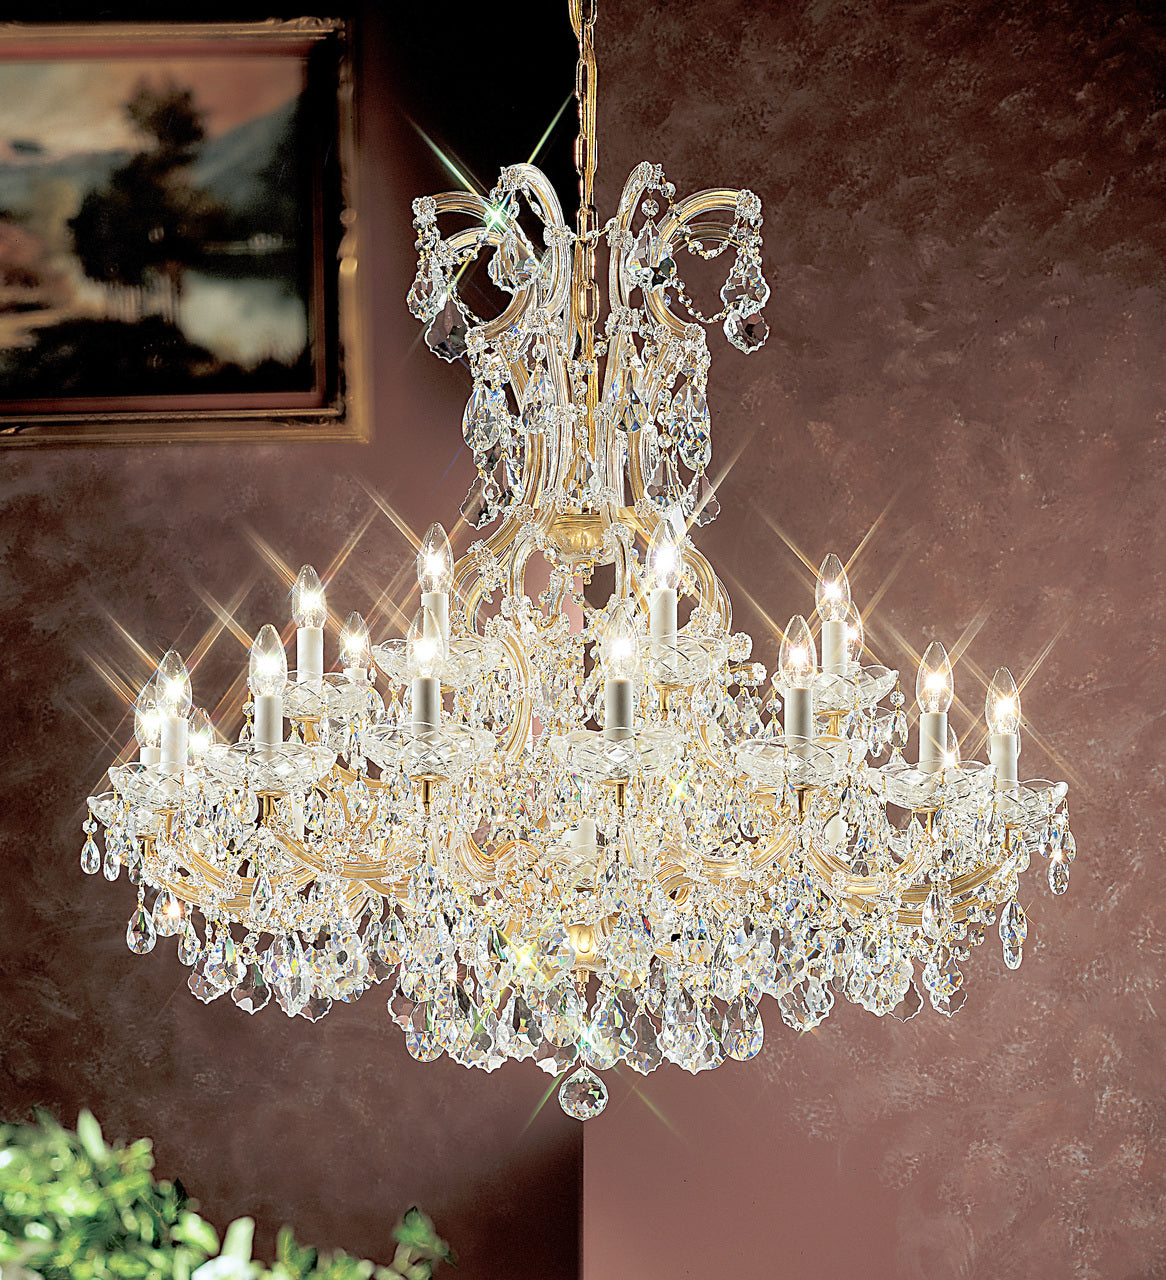 Classic Lighting 8159 OWG S Maria Theresa Traditional Crystal Chandelier in Olde World Gold (Imported from Italy)